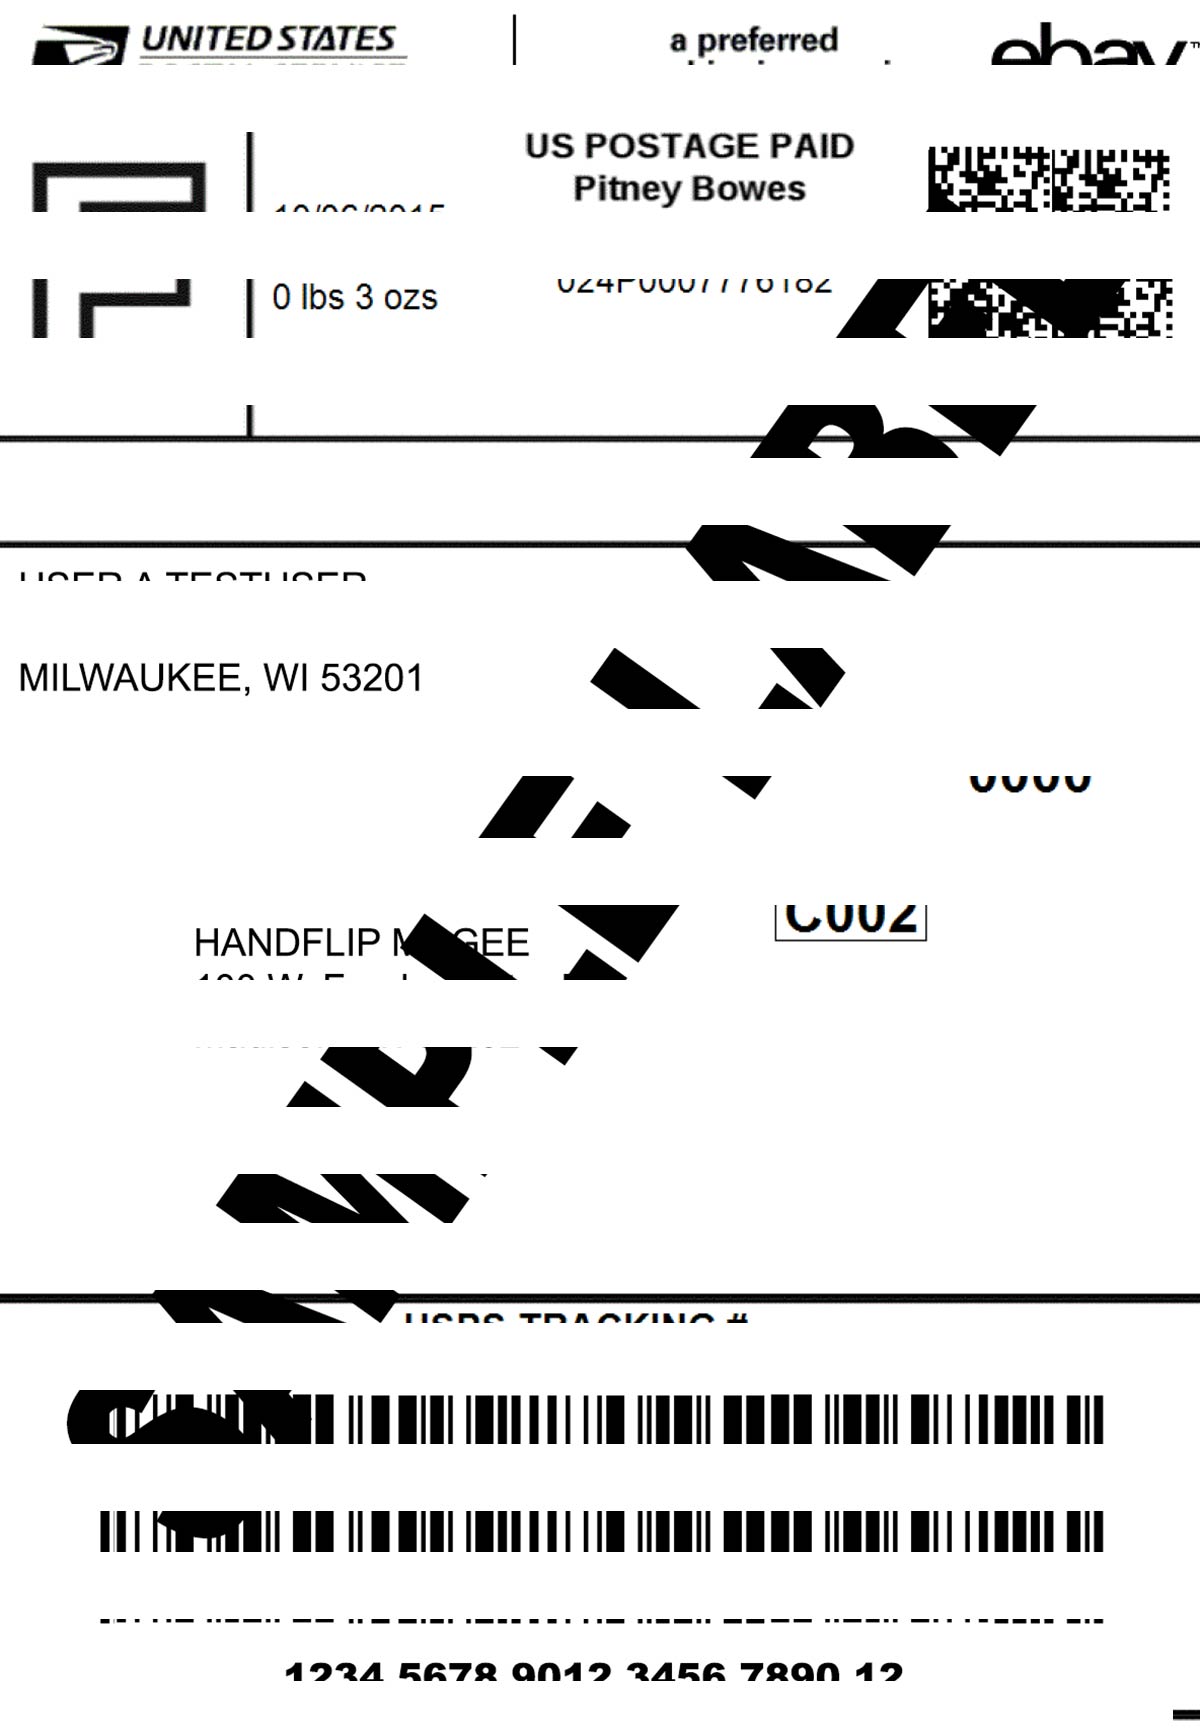 Thermal Printer Test - Shipping Label - Repetitive Horizonal Lines.